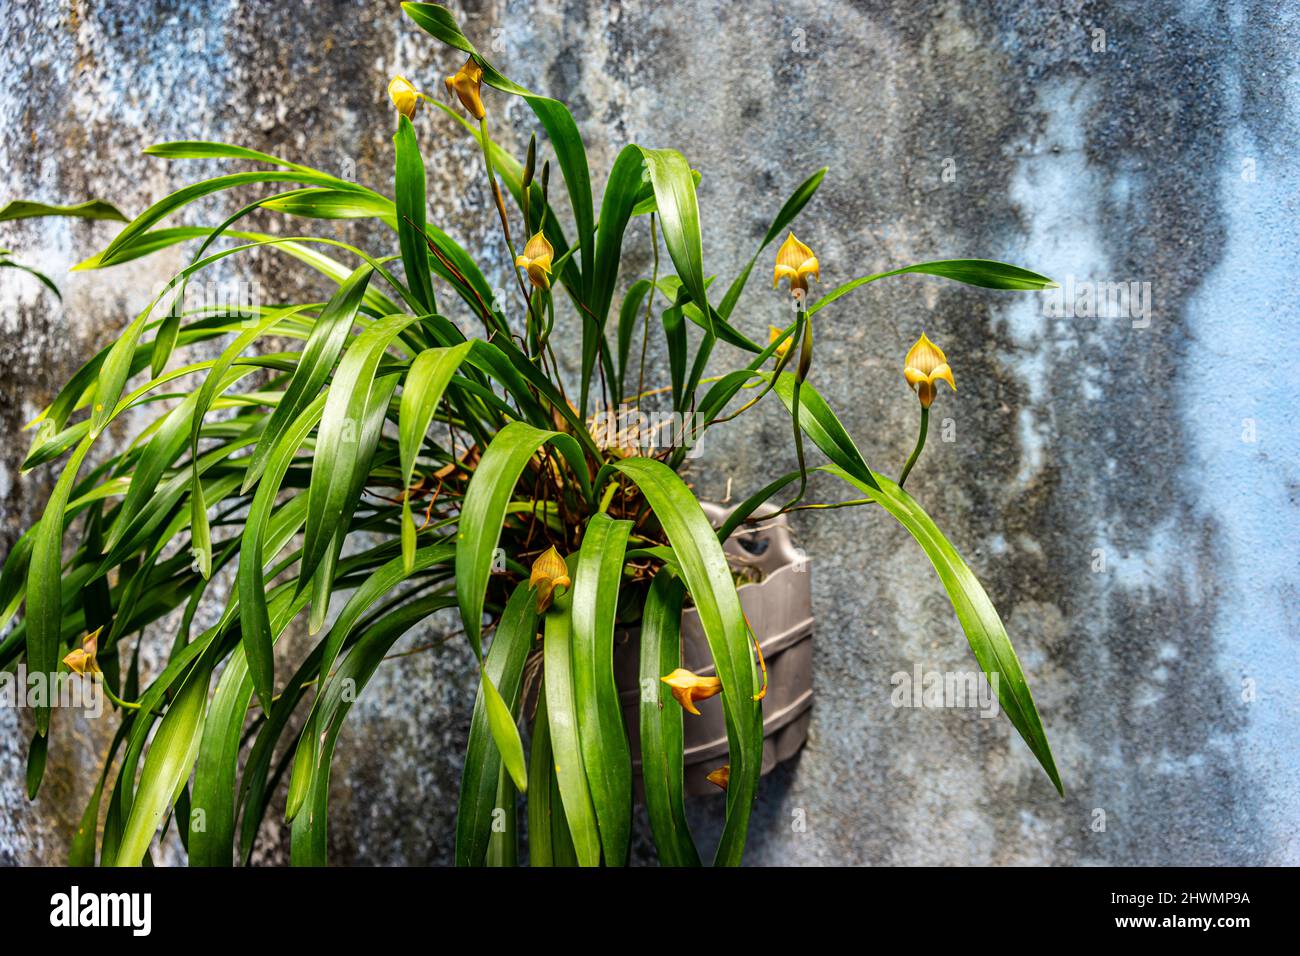 Maxillaria egertonianum, also known as Trigonidium egertonianum, growing against a blue wall coated with moss in Jinotega, Nicaragua Stock Photo